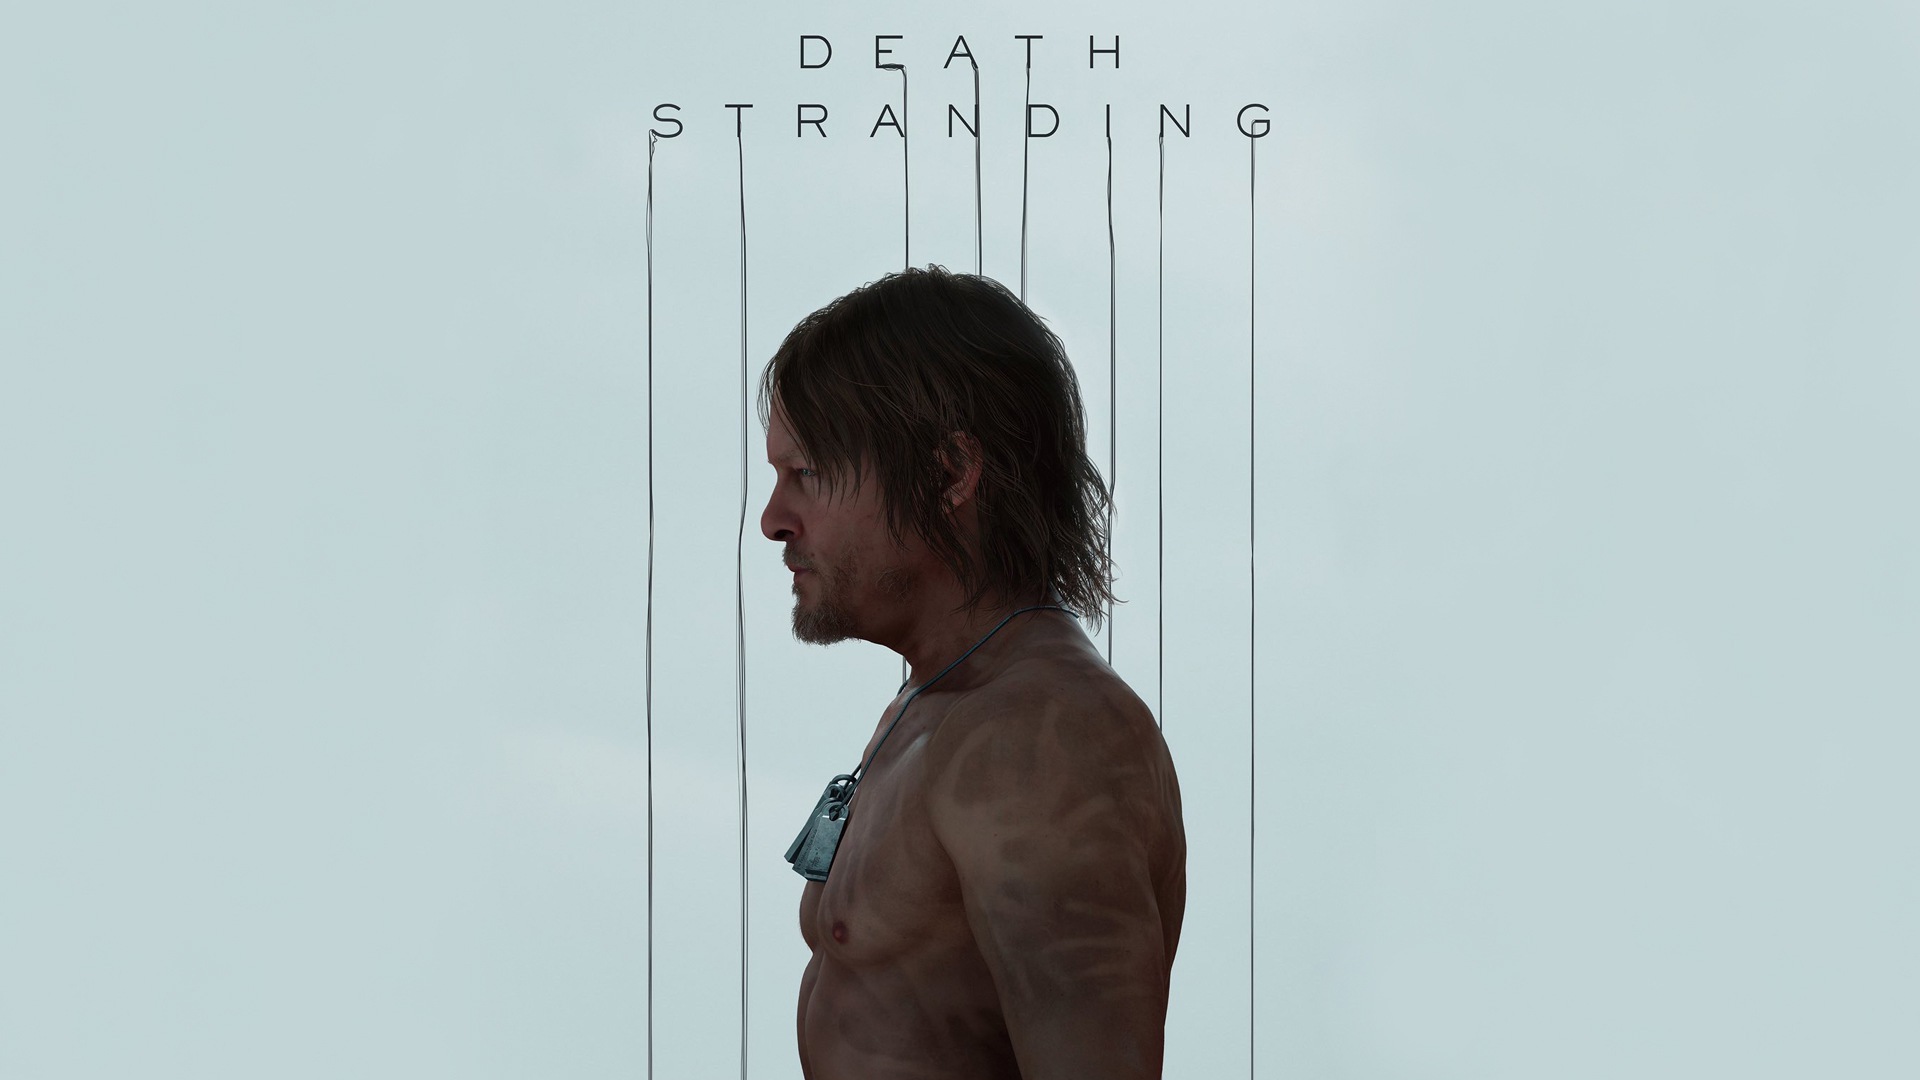 General 1920x1080 Death Stranding simple background Norman Reedus video games men shirtless dog tag dark hair video game characters actor Kojima Productions